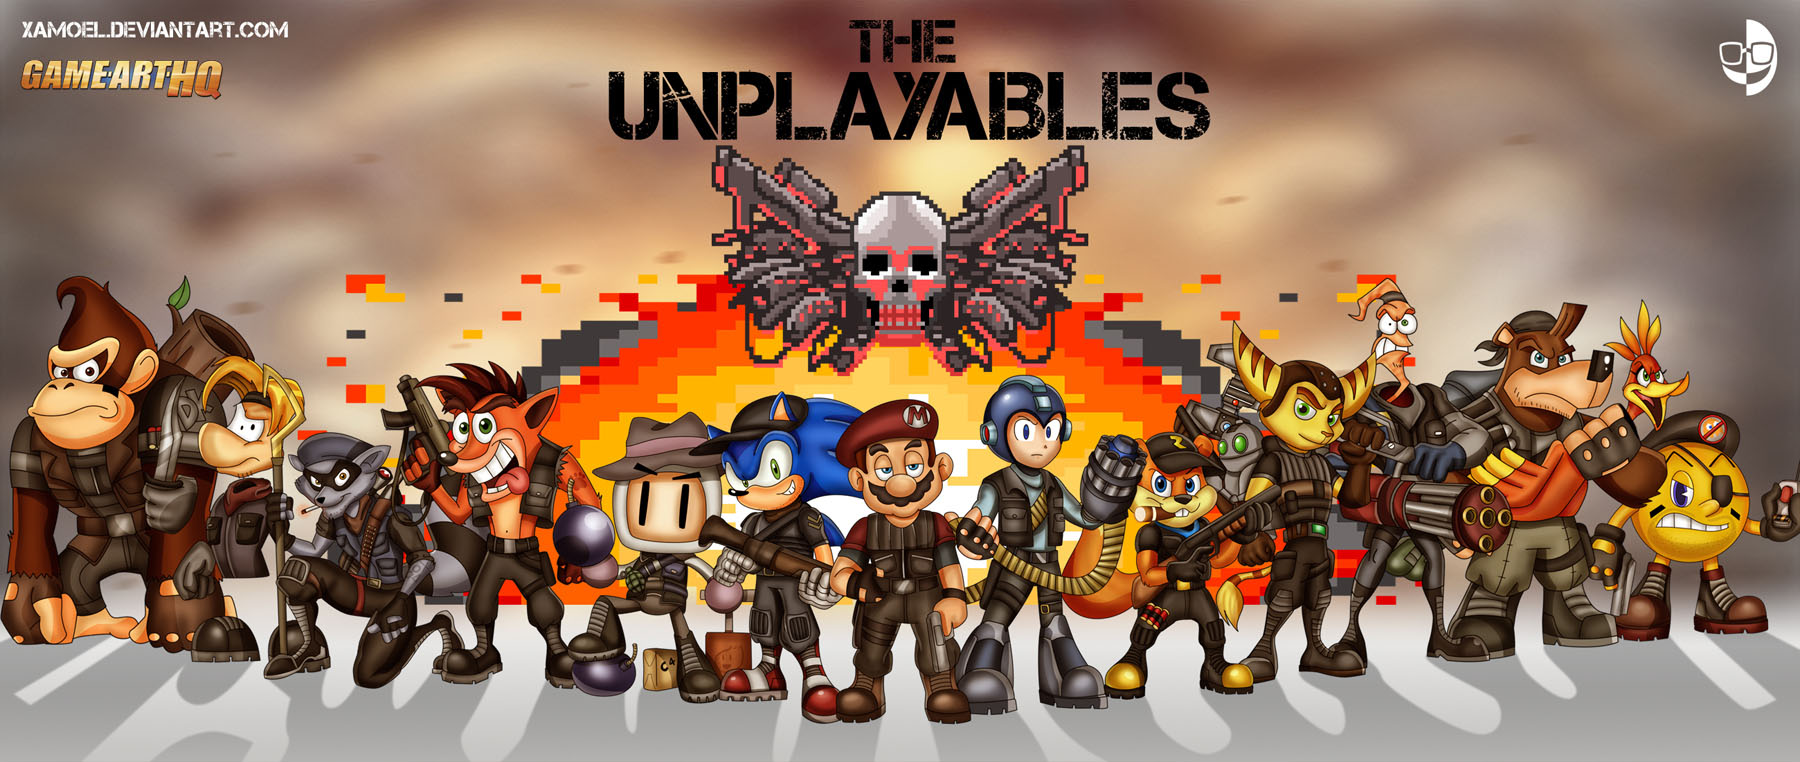 The Unplayables Expendables Video Game Parody Art